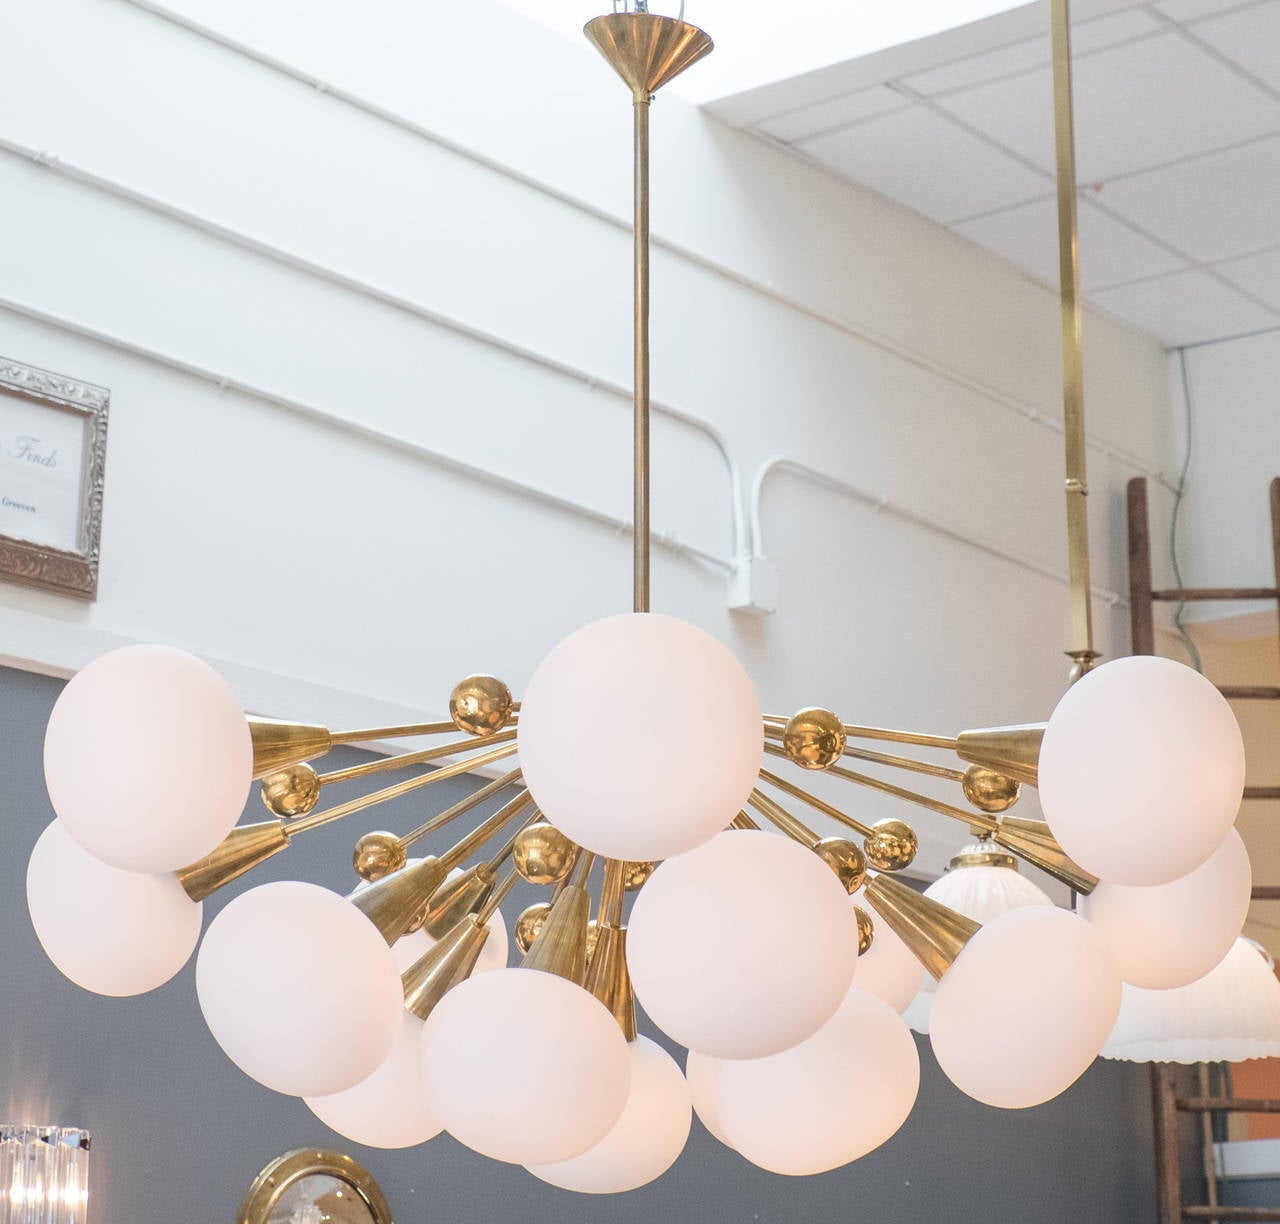 Italian vintage Murano glass and brass Sputnik chandelier in the style of Stilnovo. Fifteen glass globes and fifteen brass balls extend on brass stems from the central brass fixture. Rewired for the US.